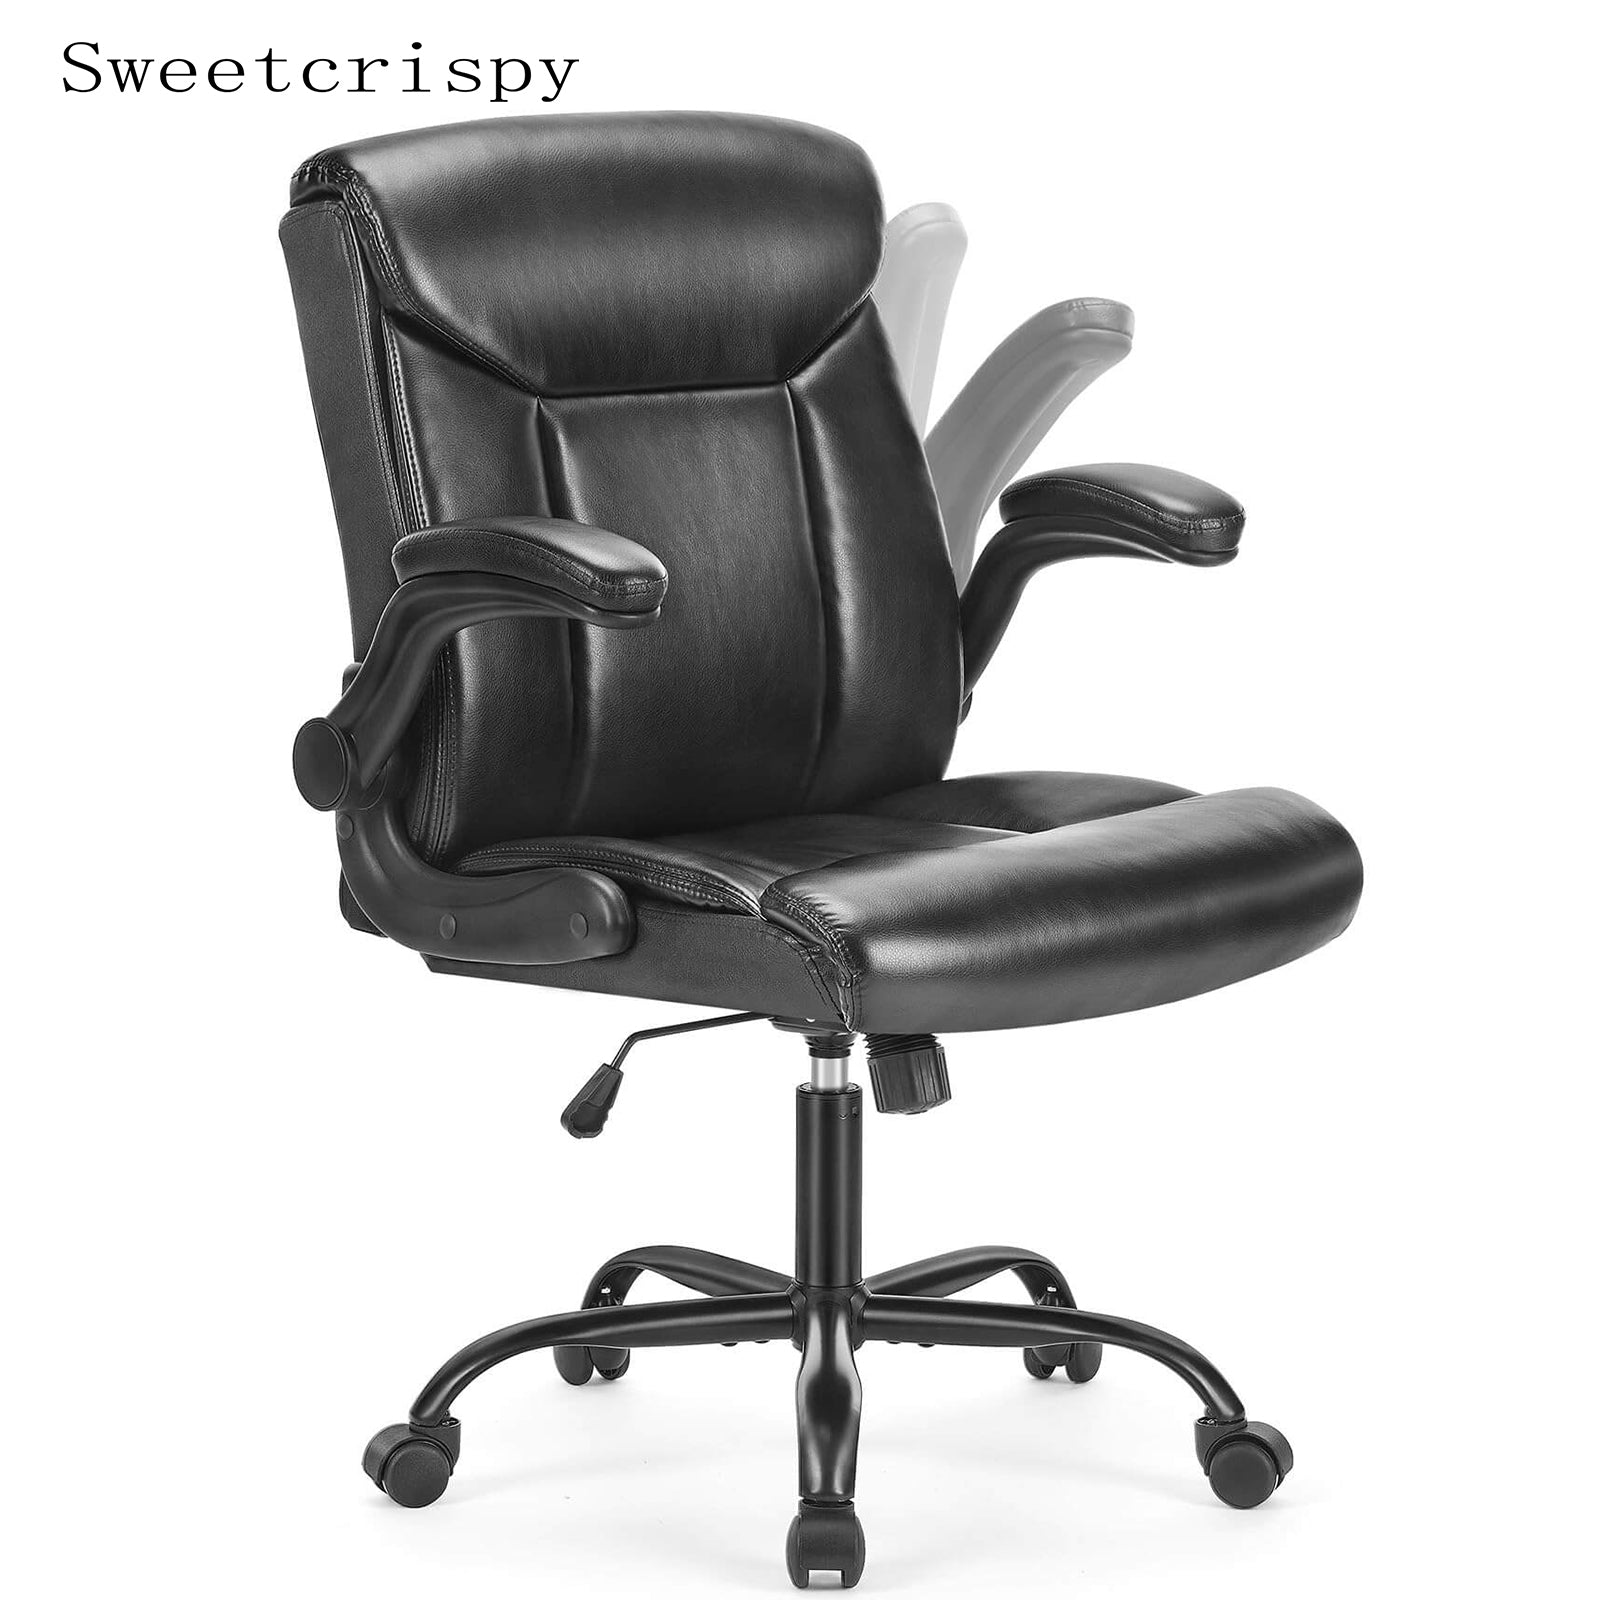 High Back Pillow Cushion Swivel Conference Chair in Gray or Black